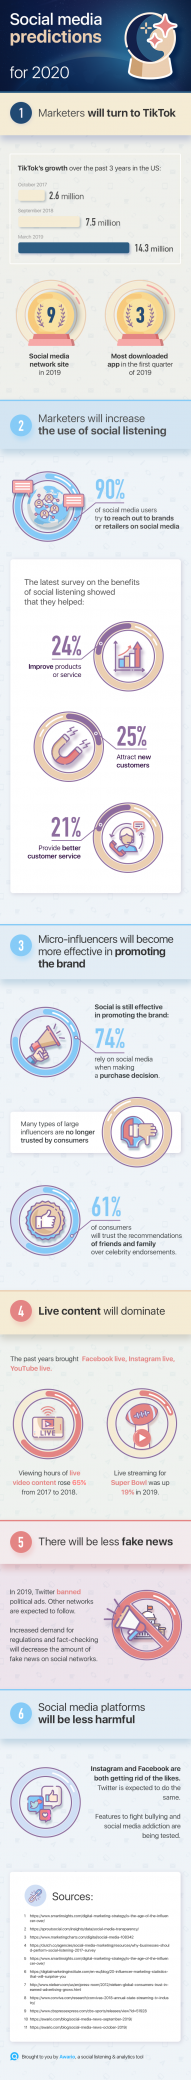 Social Media Predictions for 2020 [Infographic]